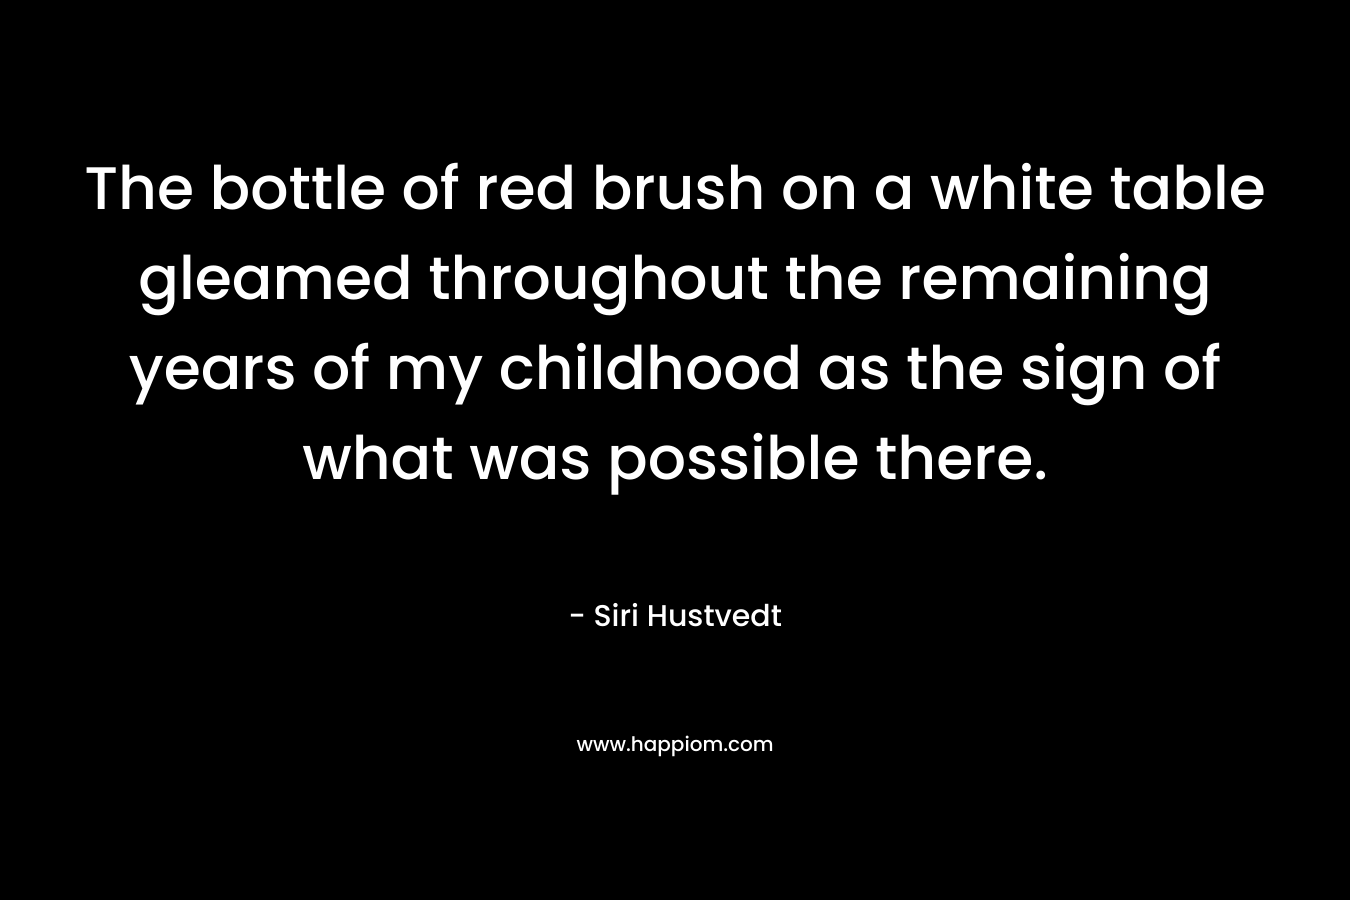 The bottle of red brush on a white table gleamed throughout the remaining years of my childhood as the sign of what was possible there. – Siri Hustvedt